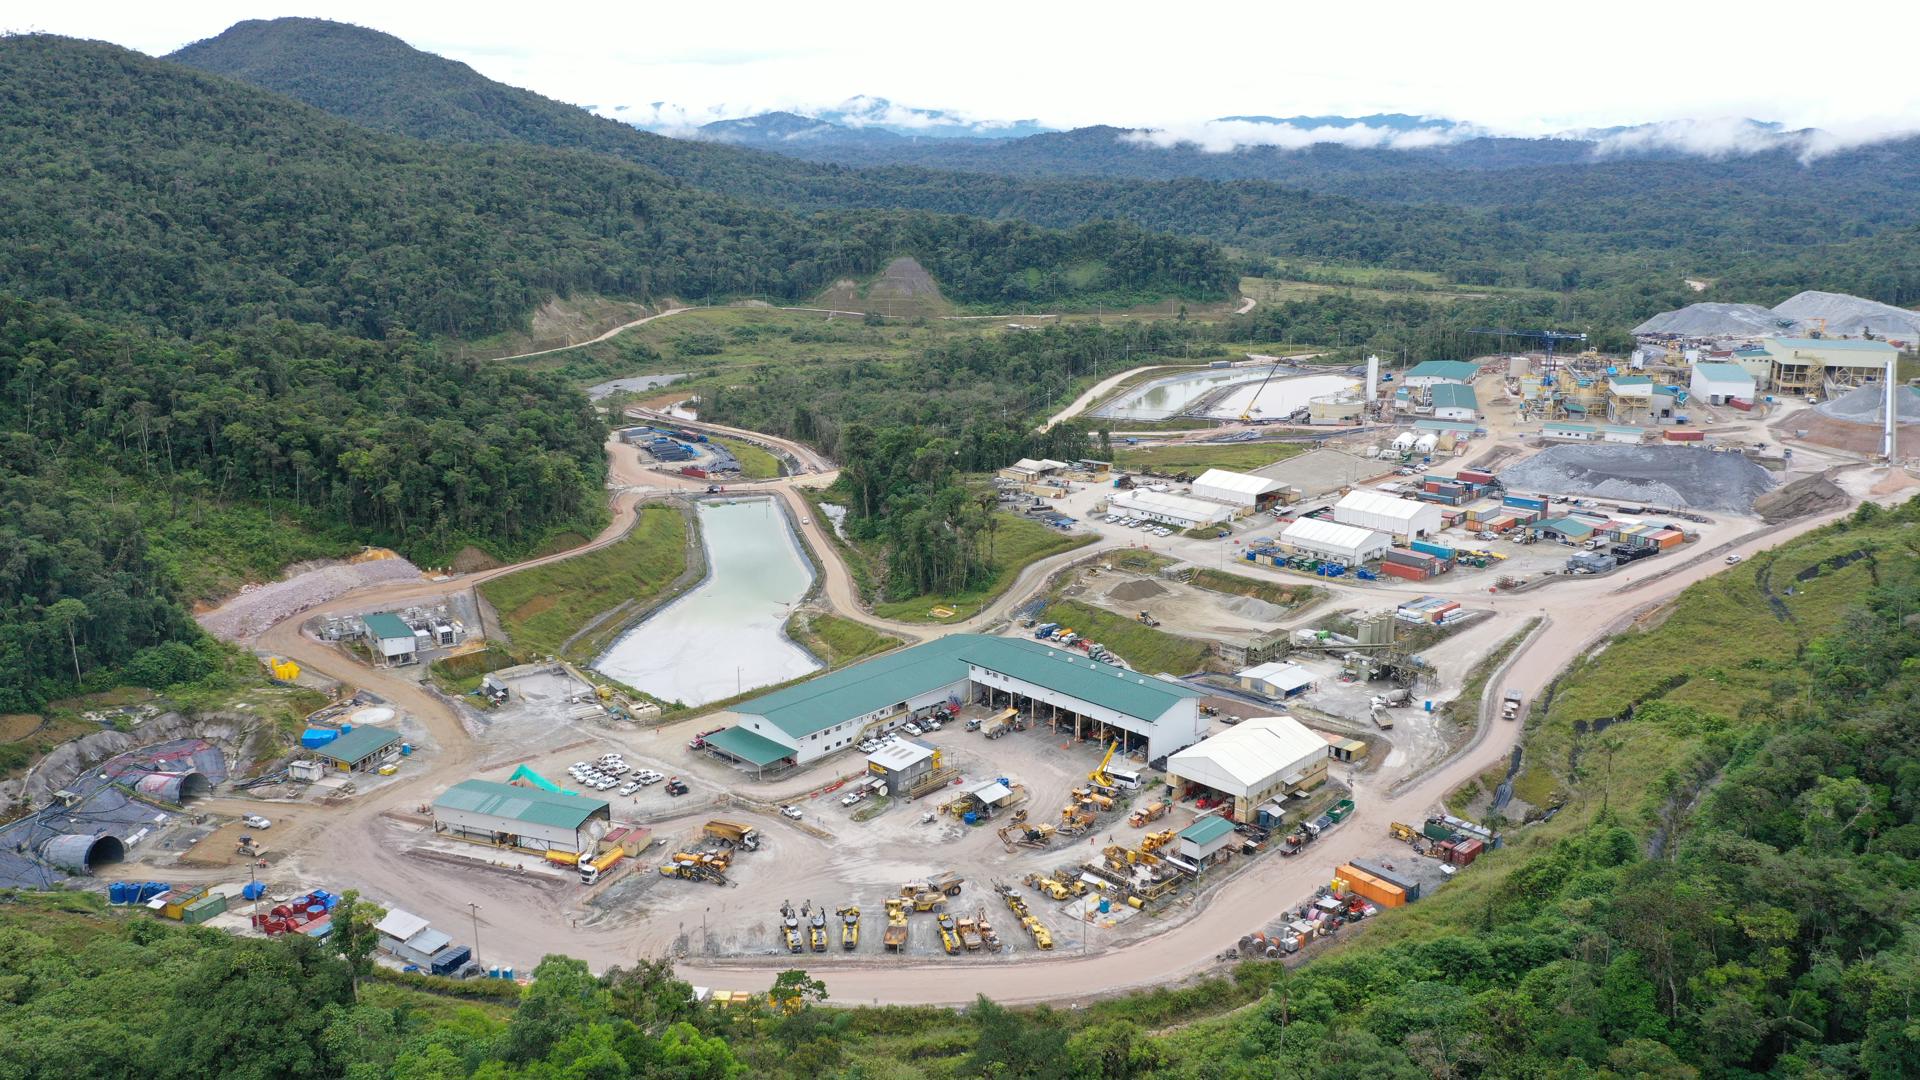 Aerial photograph provided by the mining company Lundin Gold that shows an aerial view of the Frutos del Norte mine, on November 9, 2019 in the province of Zamora Chinchipe (Ecuador). EFE/ Lundin Gold /EDITORIAL USE ONLY /ONLY AVAILABLE TO ILLUSTRATE THE ACCOMPANYING NEWS (MANDATORY CREDIT)